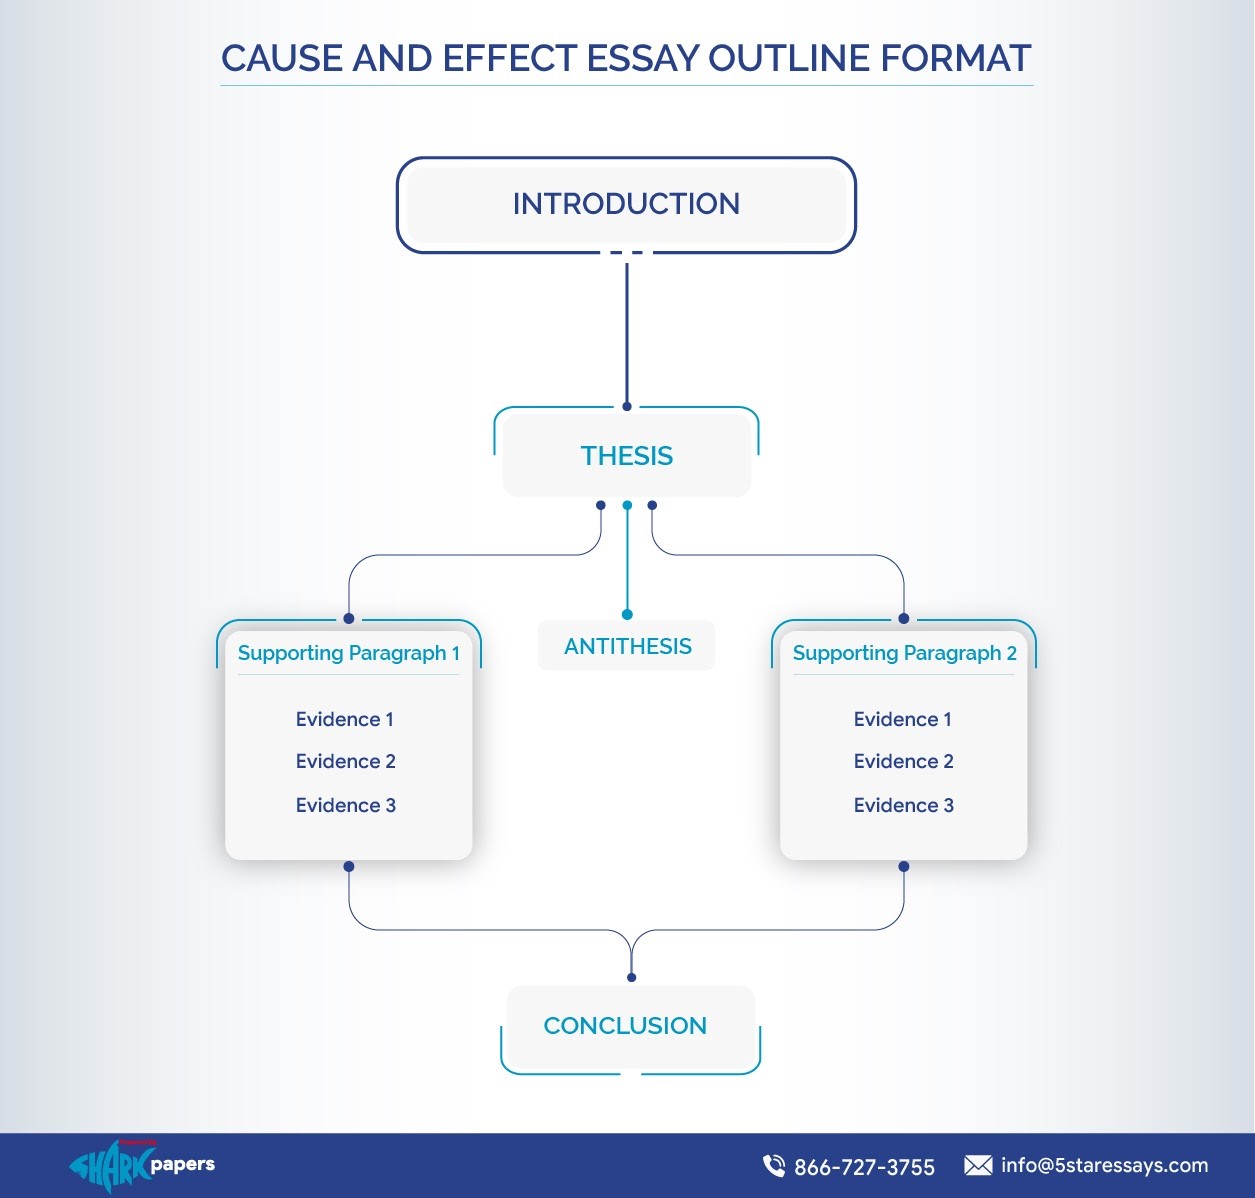  Cause and Effect Essay Outline Format